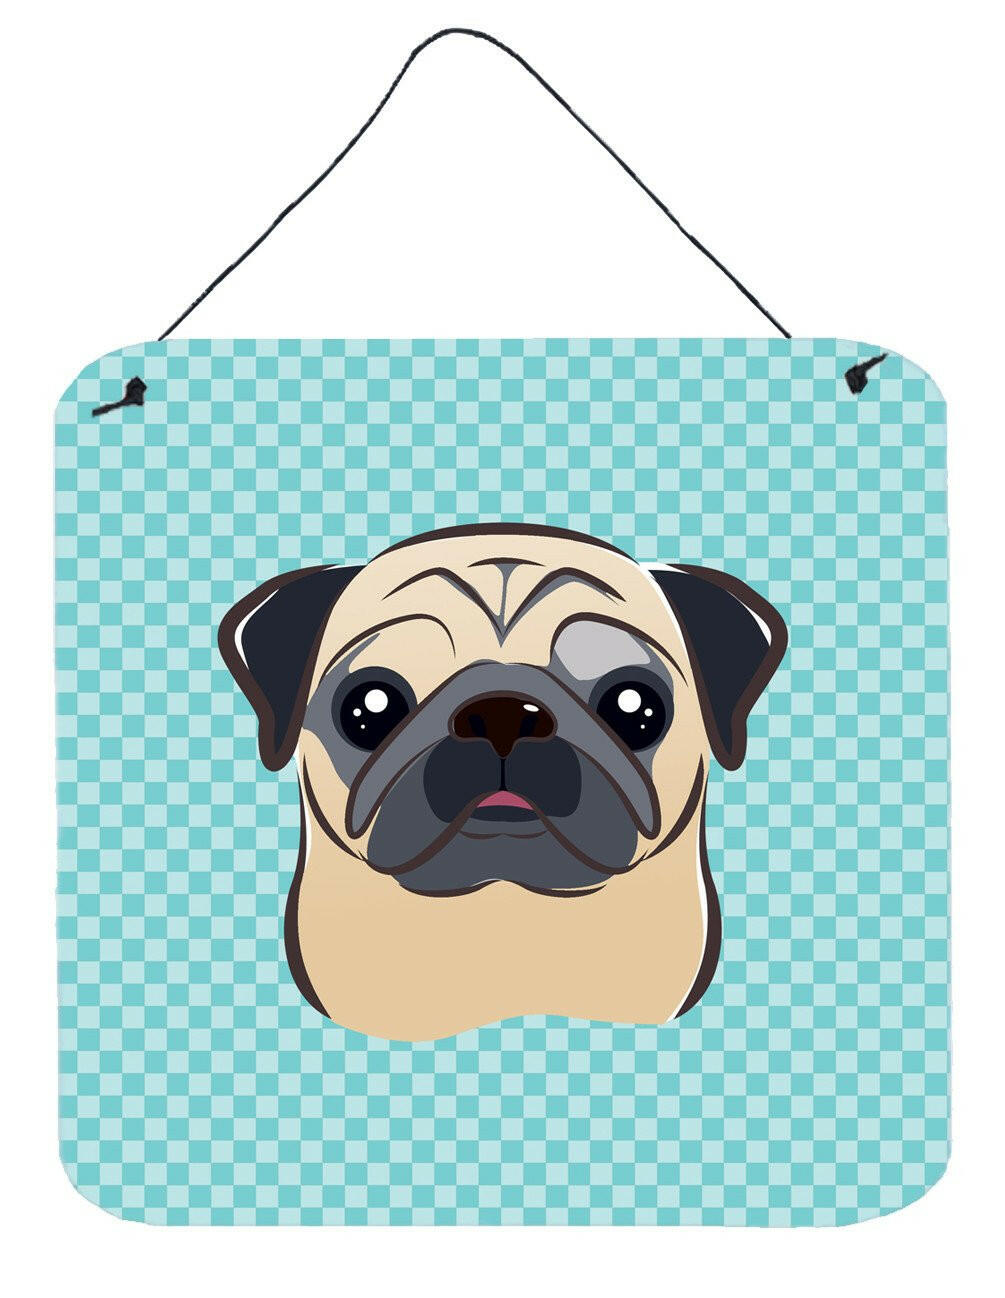 Checkerboard Blue Fawn Pug Wall or Door Hanging Prints BB1200DS66 by Caroline's Treasures